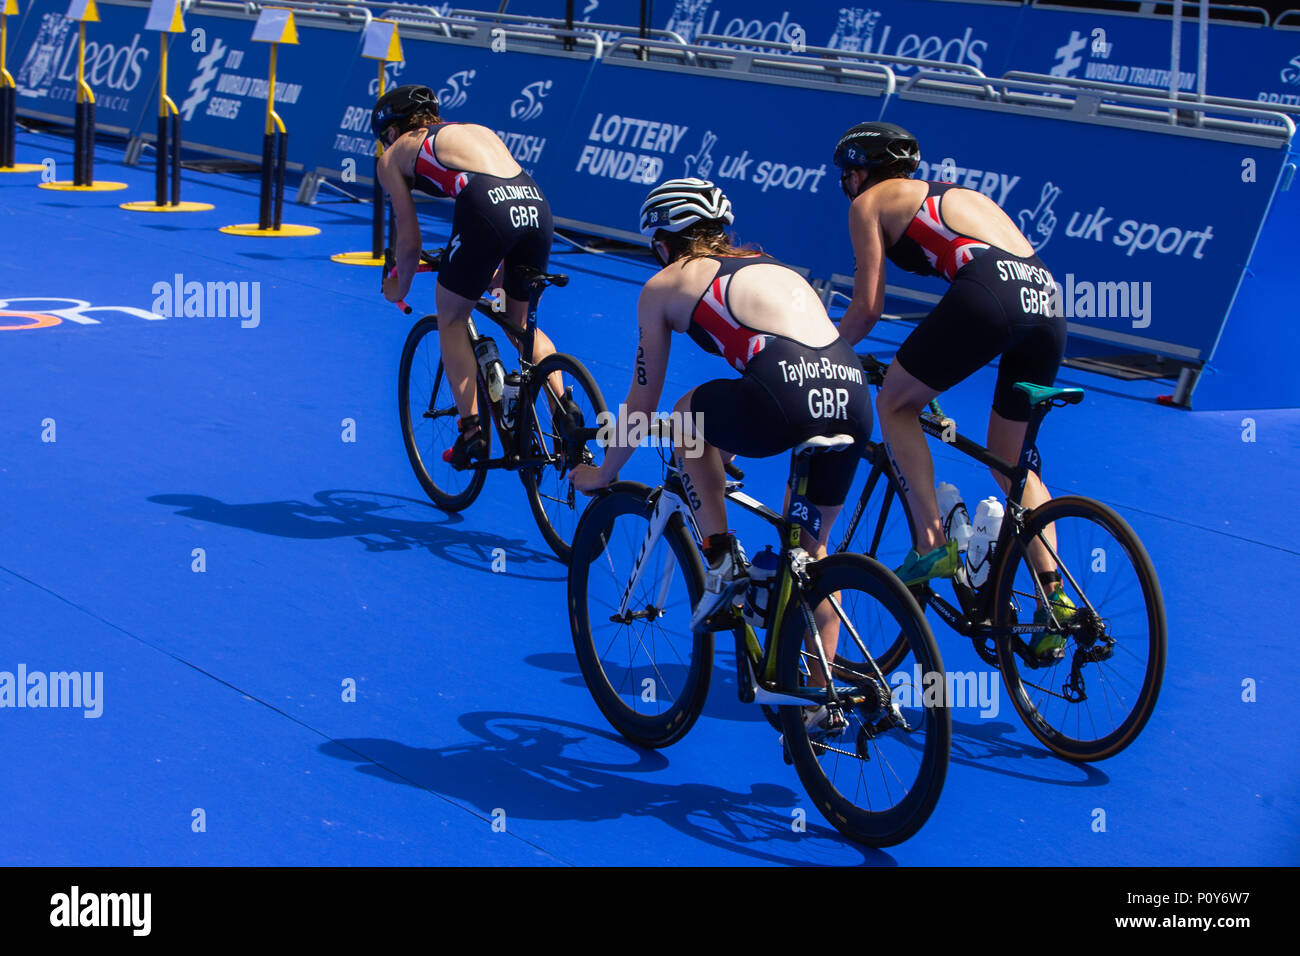 Leeds, UK - 10 June 2018.  British Triathletes Jodie Stimpson, Georgia Taylor-Brown and Sophie Coldwell competing in the AJ Bell World Triathlon Series race in Leeds. Credit: James Copeland/Alamy Live News Stock Photo